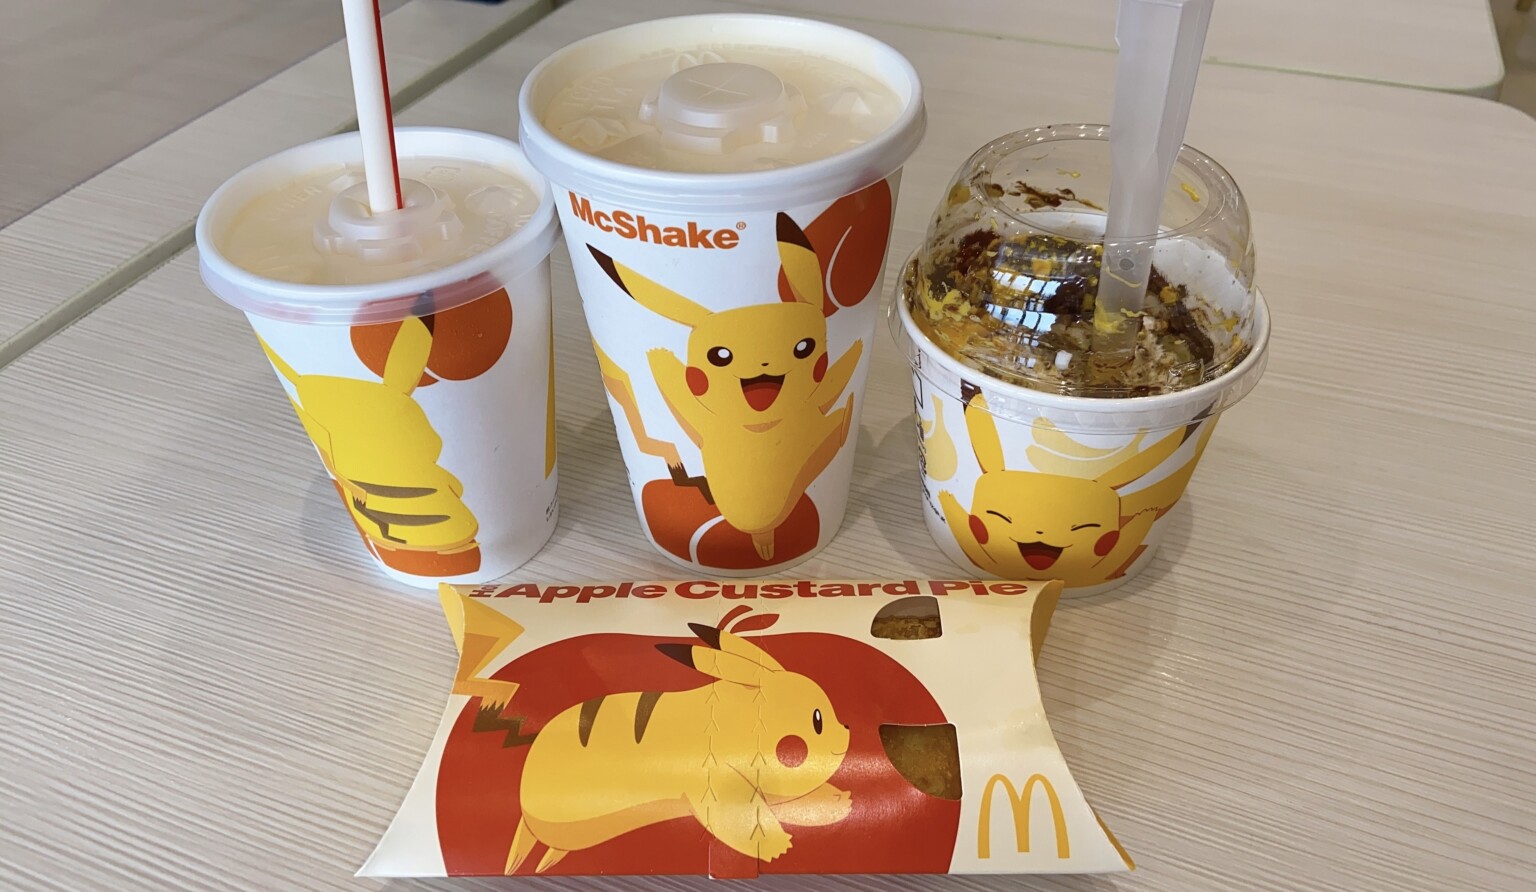 A Trio of Pikachu Sweets at Mcdonald's! hobbylink.tv